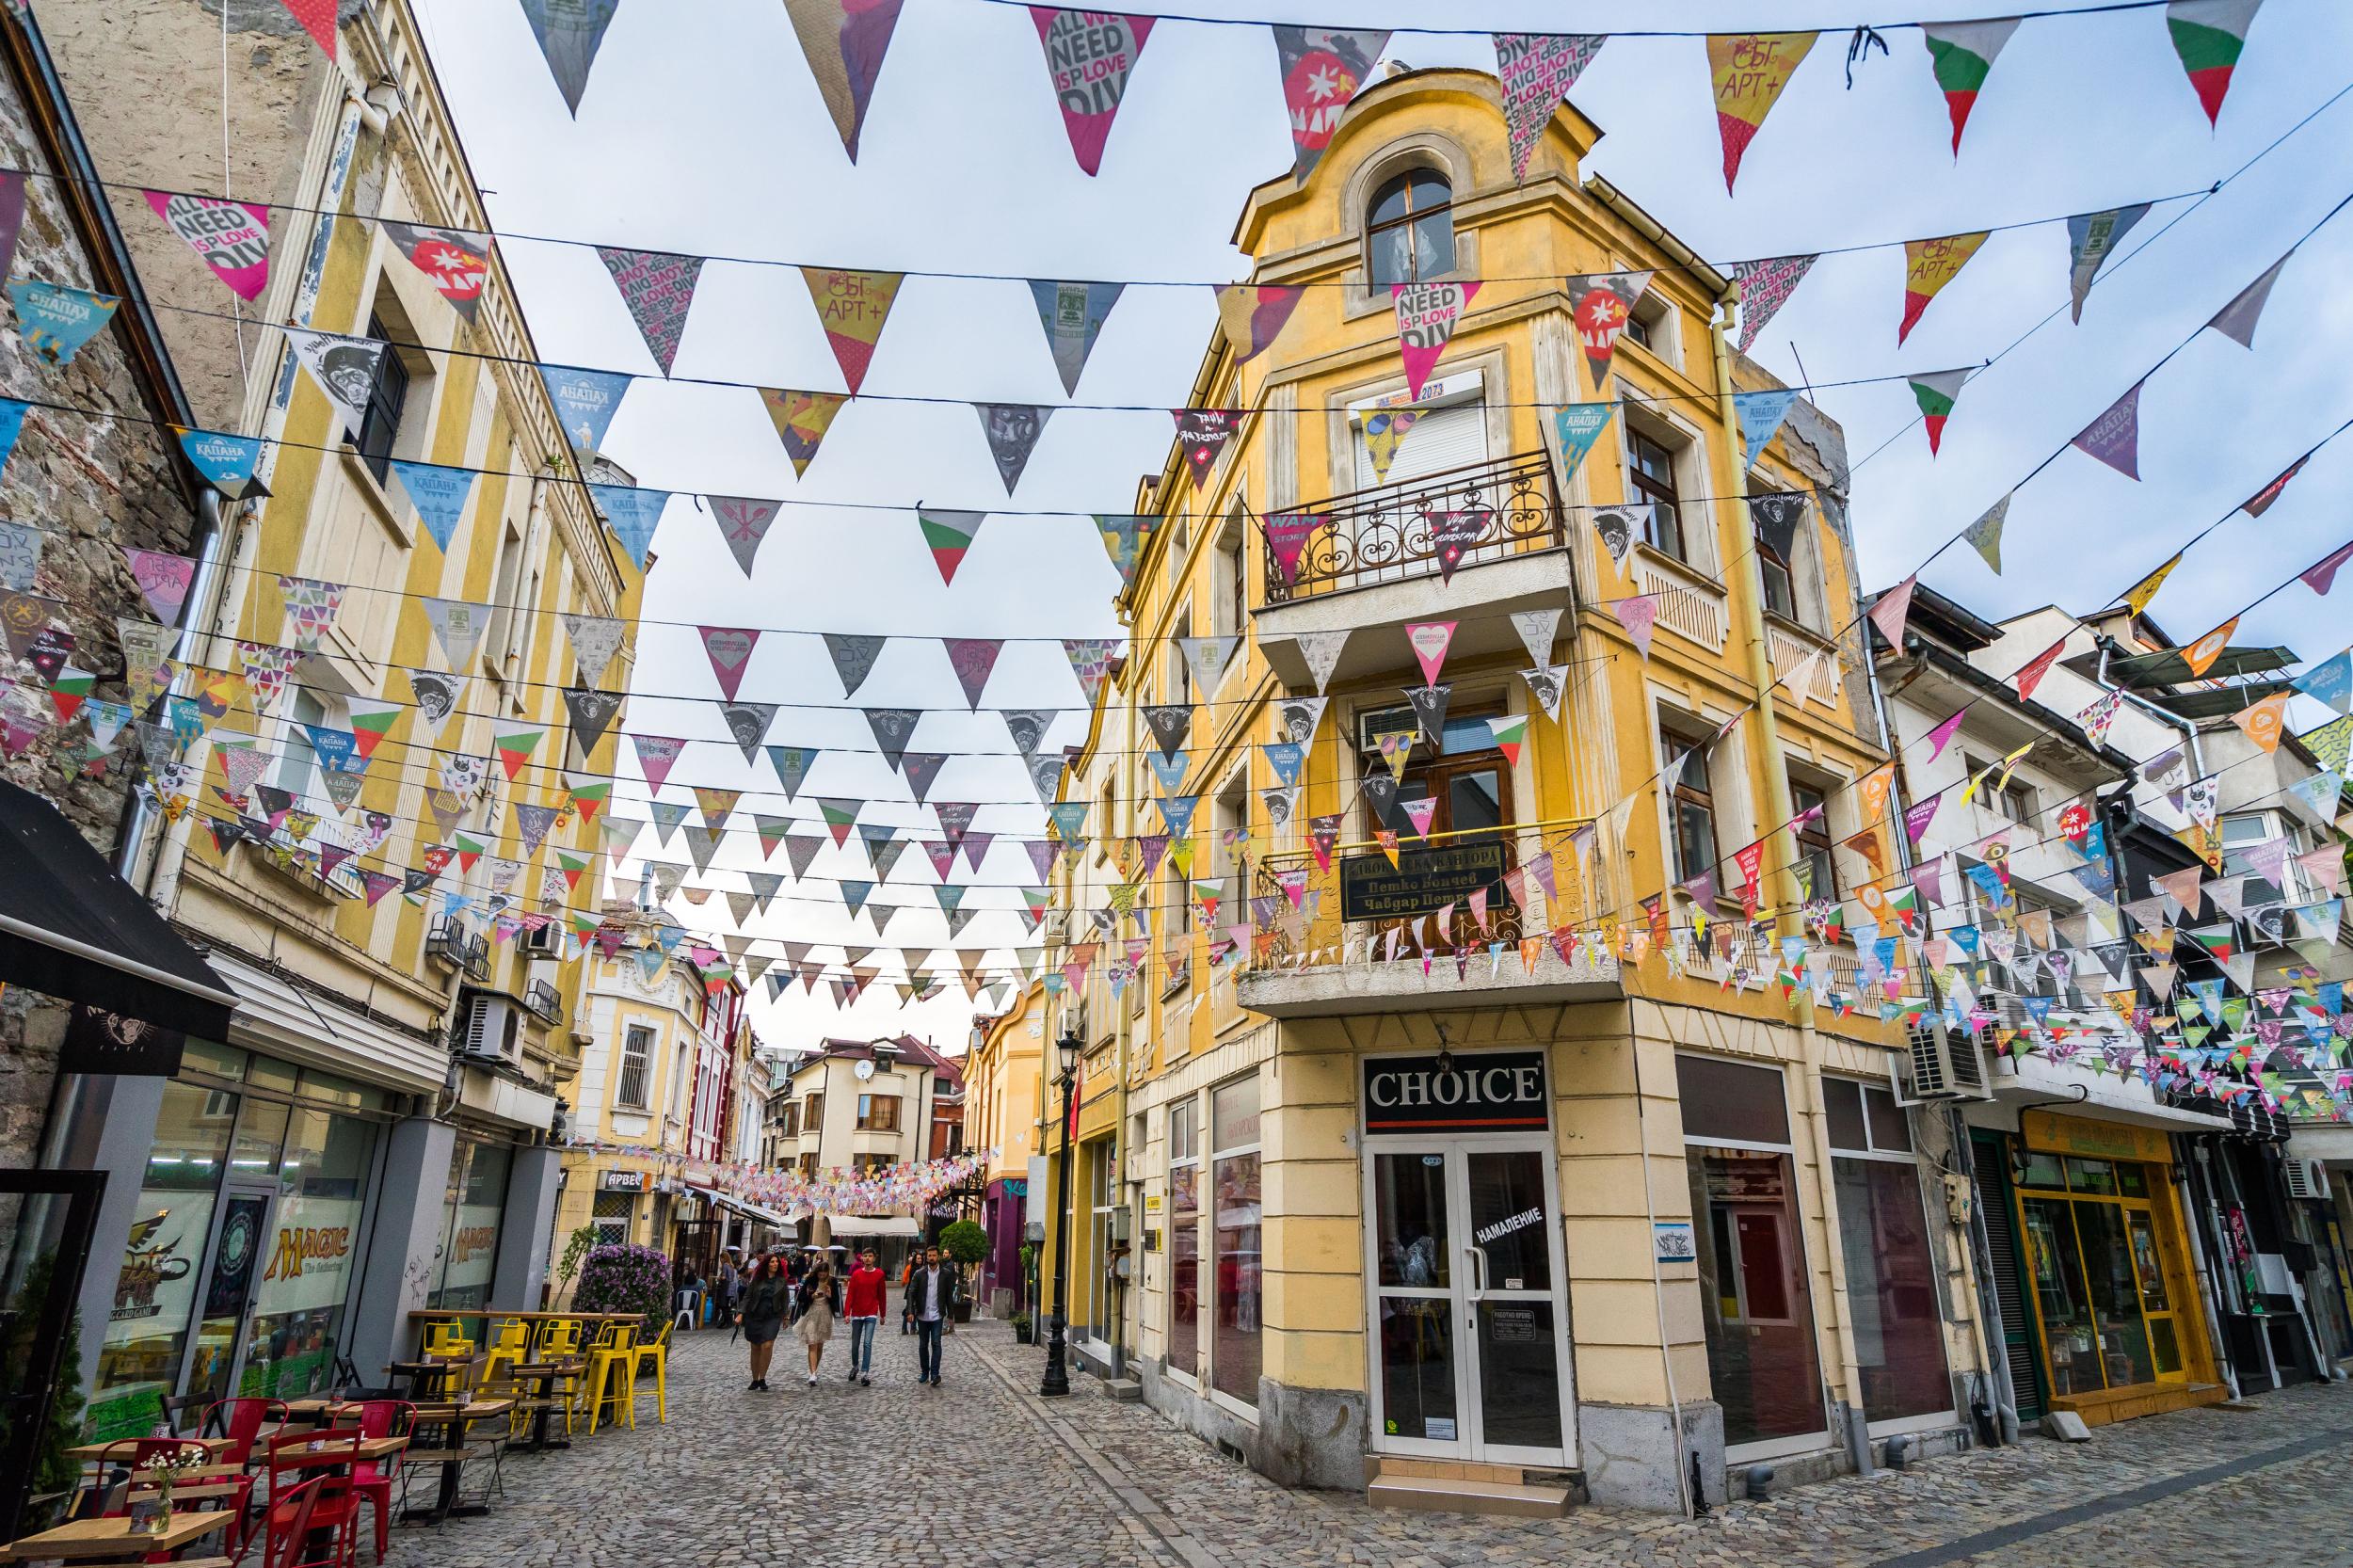 Eat and drink in Plovdiv’s hip and arty Kapana district (iStock)